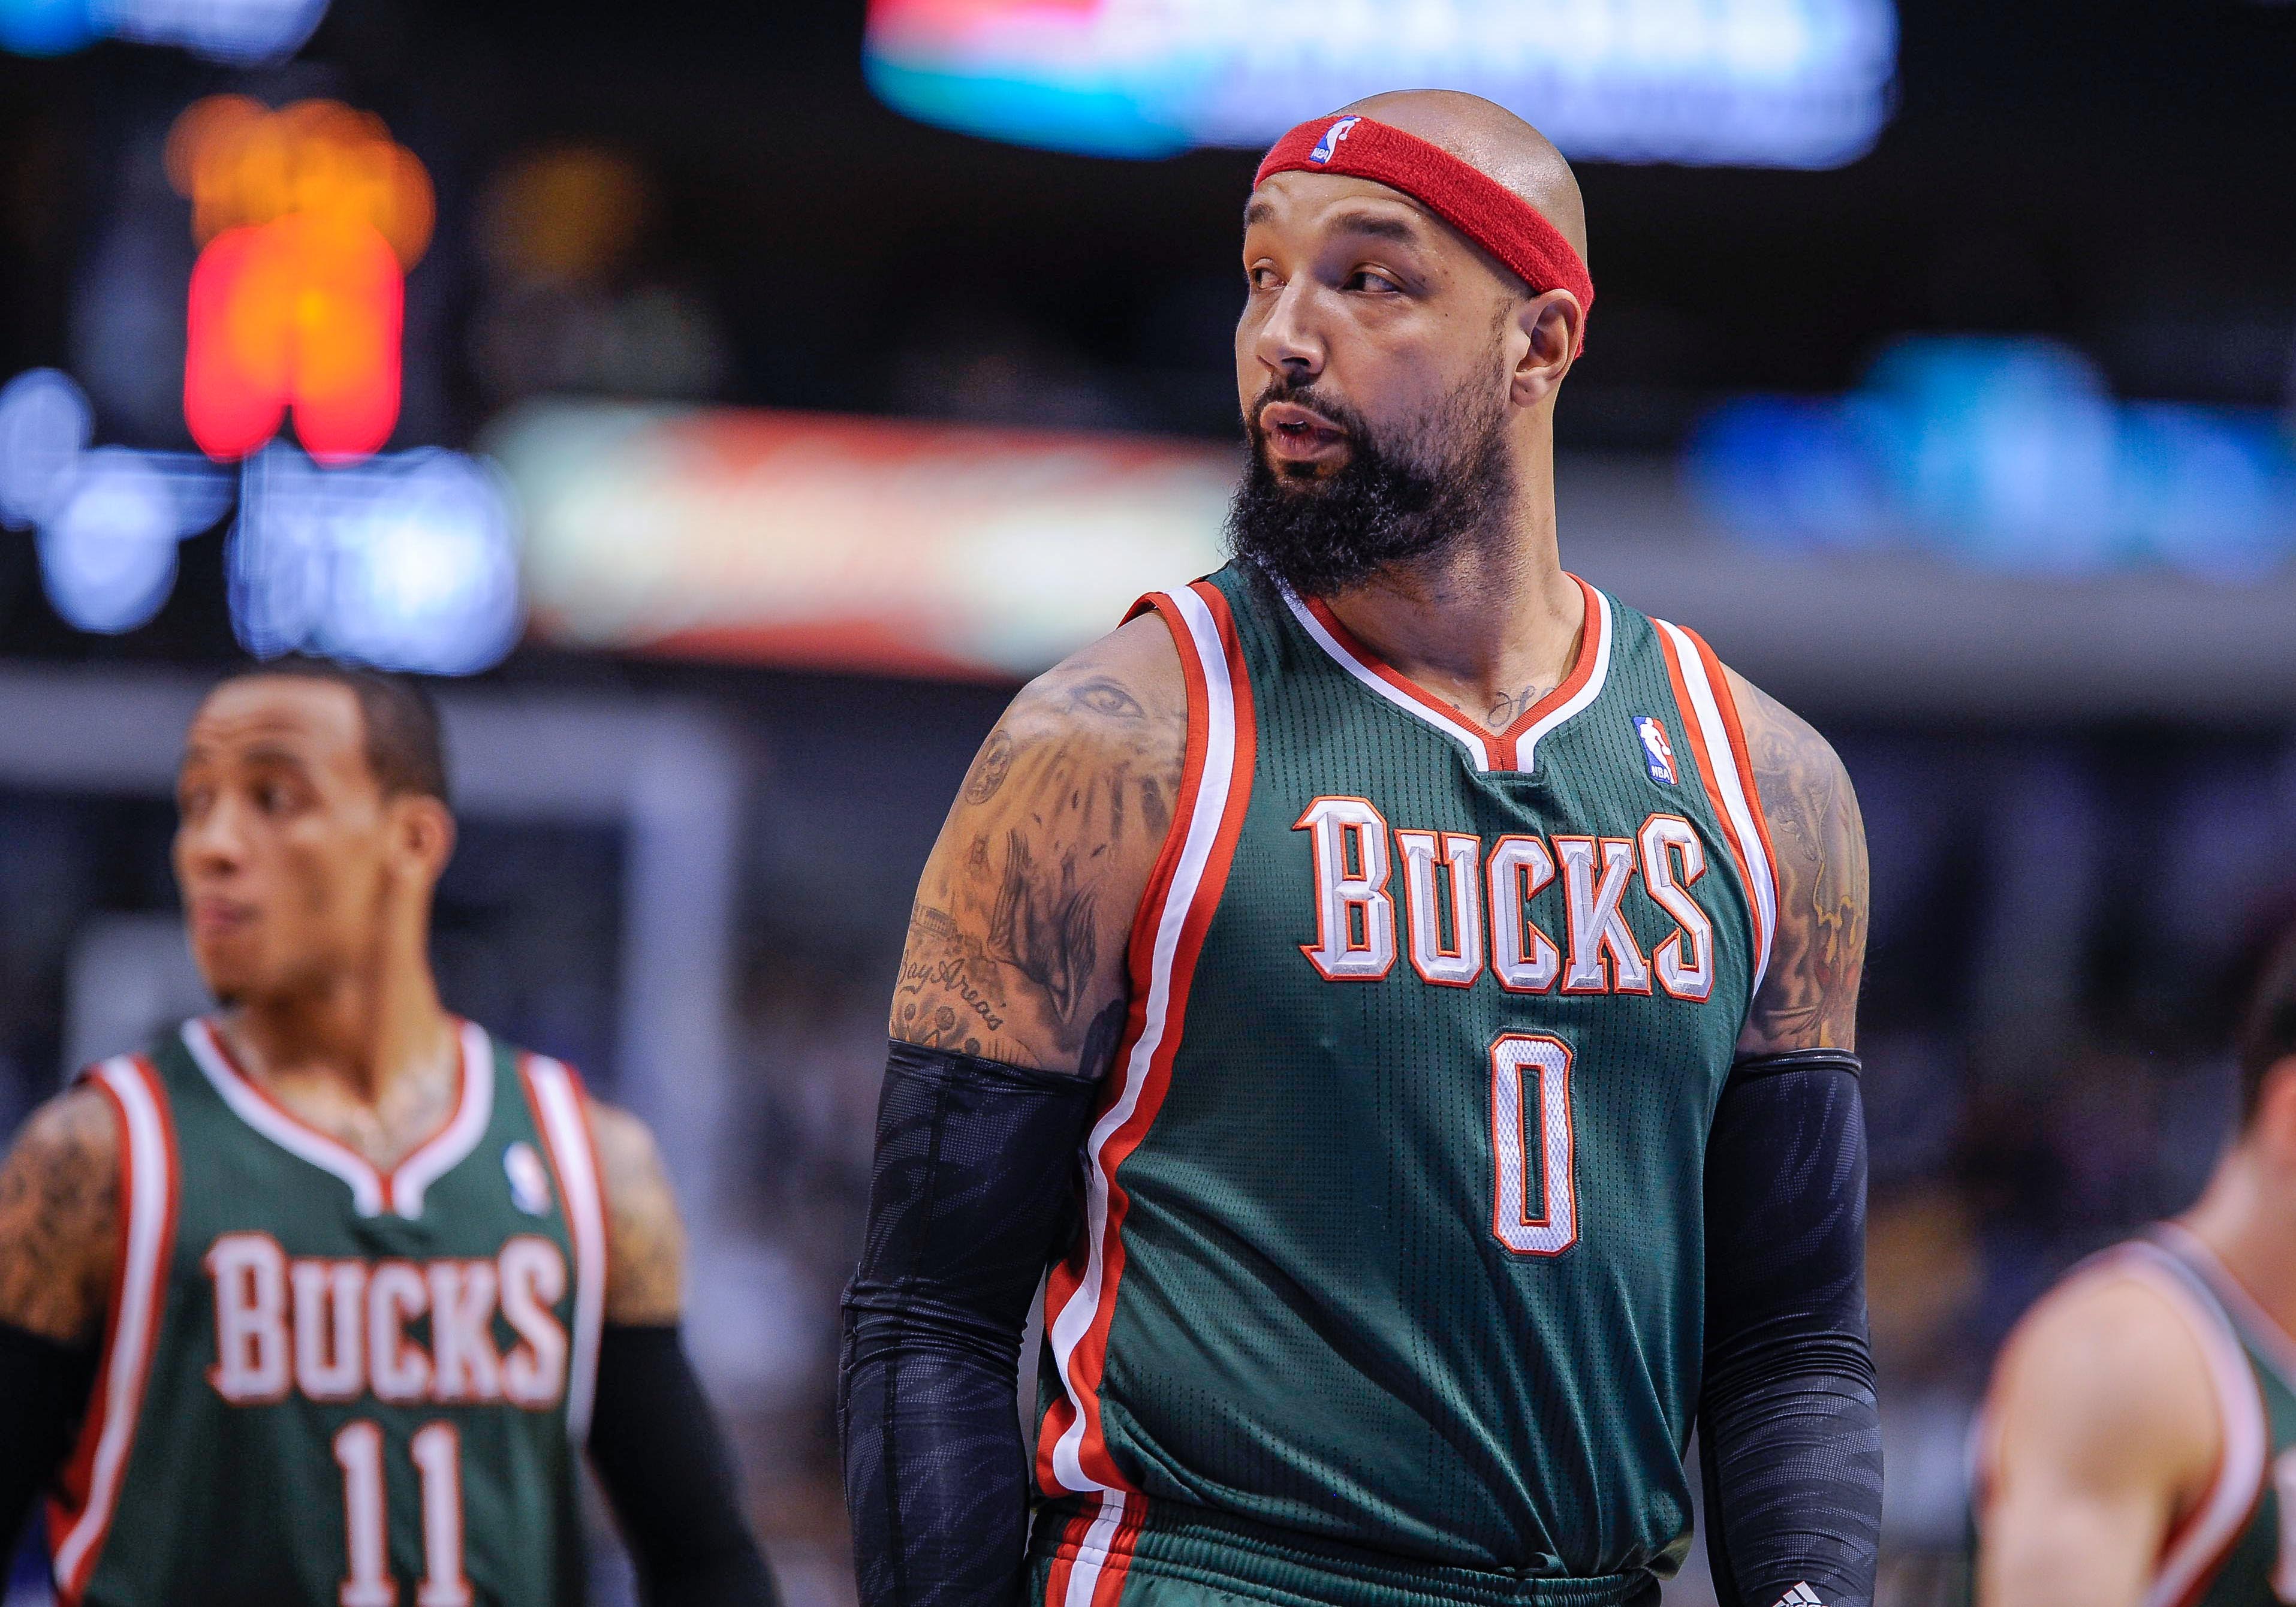 1. Drew Gooden's iconic blue hair - wide 5